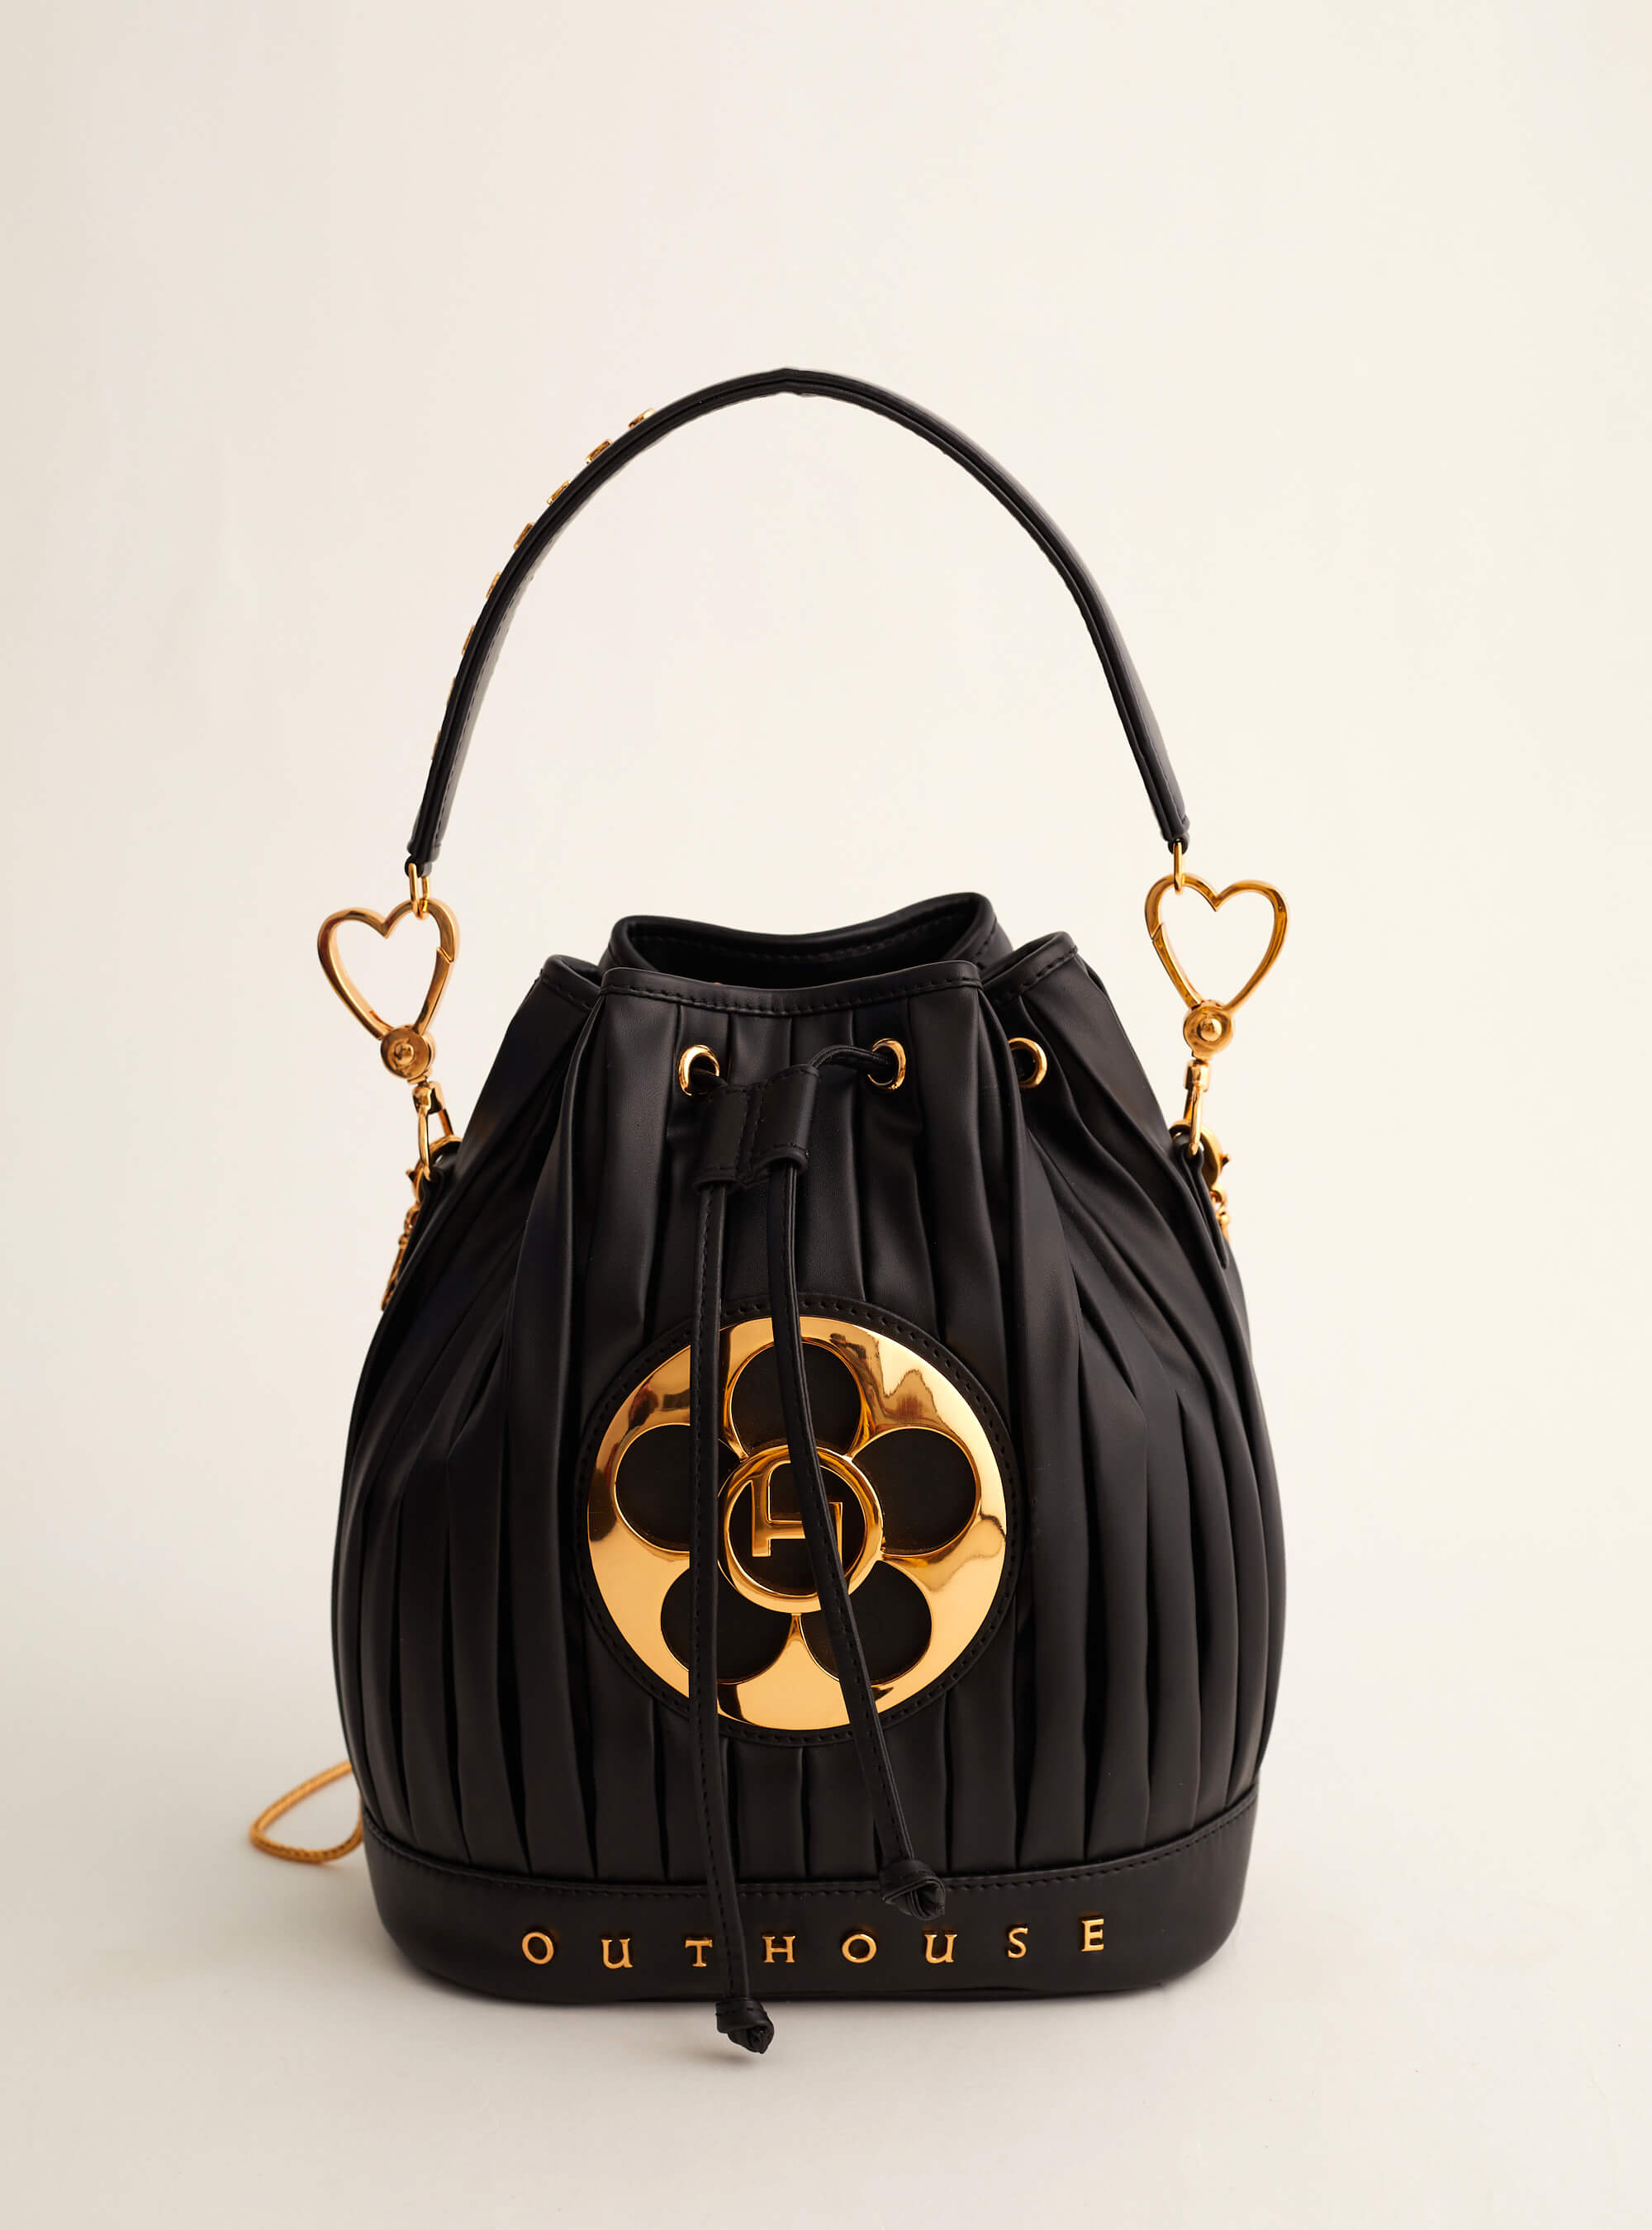 Outhouse: OH Poppi Bucket Bag in Noir Black Rosewood Maroon